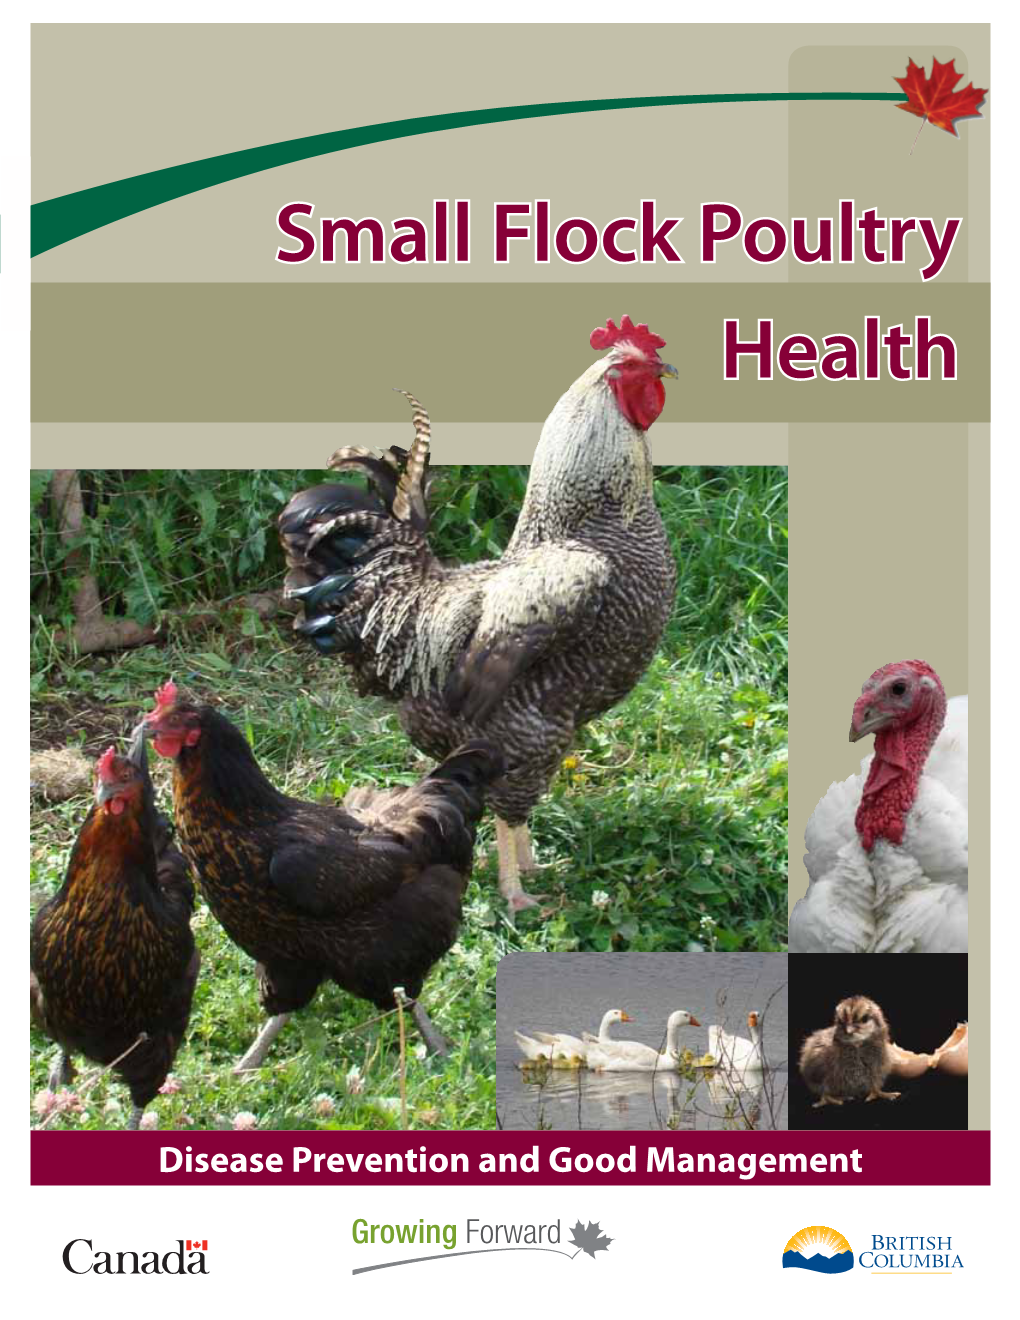 Small Flock Poultry Health Manual Has Been Funded by Growing Forward, a Federal, Provincial, Territorial Initiative